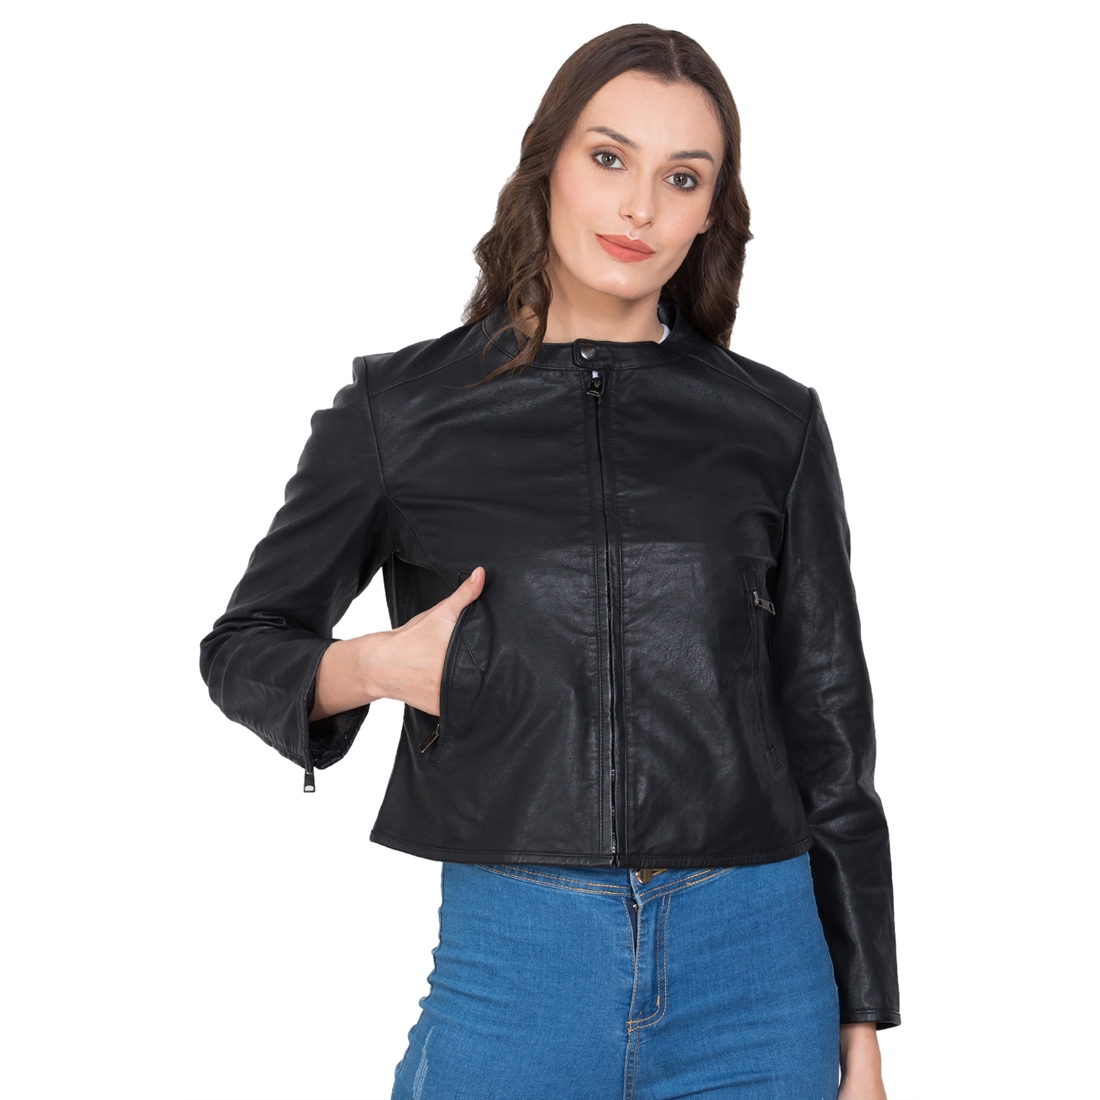 Justanned | JUSTANNED CHARCOAL WOMEN LEATHER JACKET 0